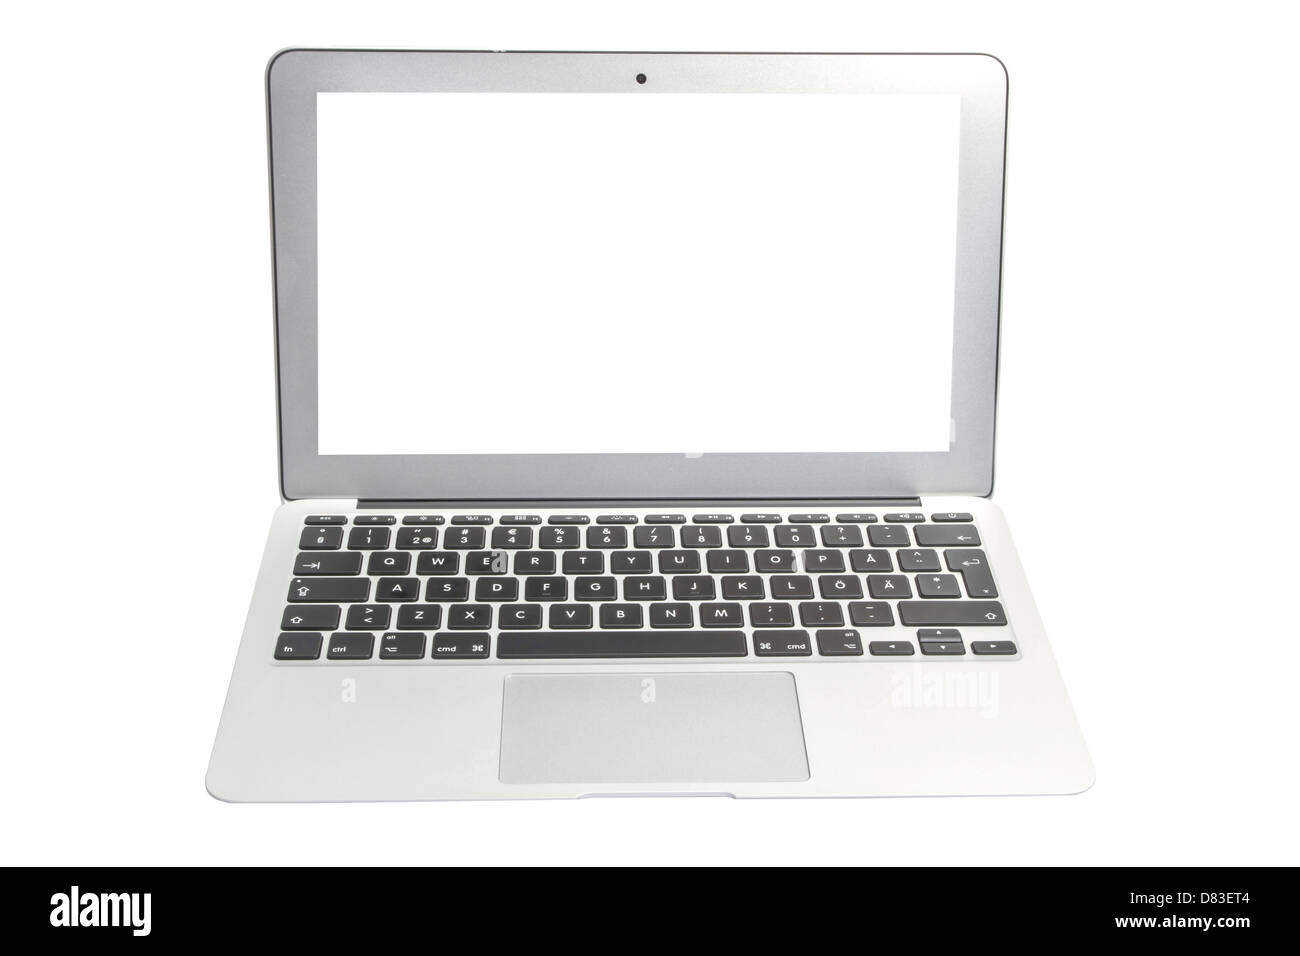 APPLE MAC BOOK AIR Computer Isolated on White Stockfoto